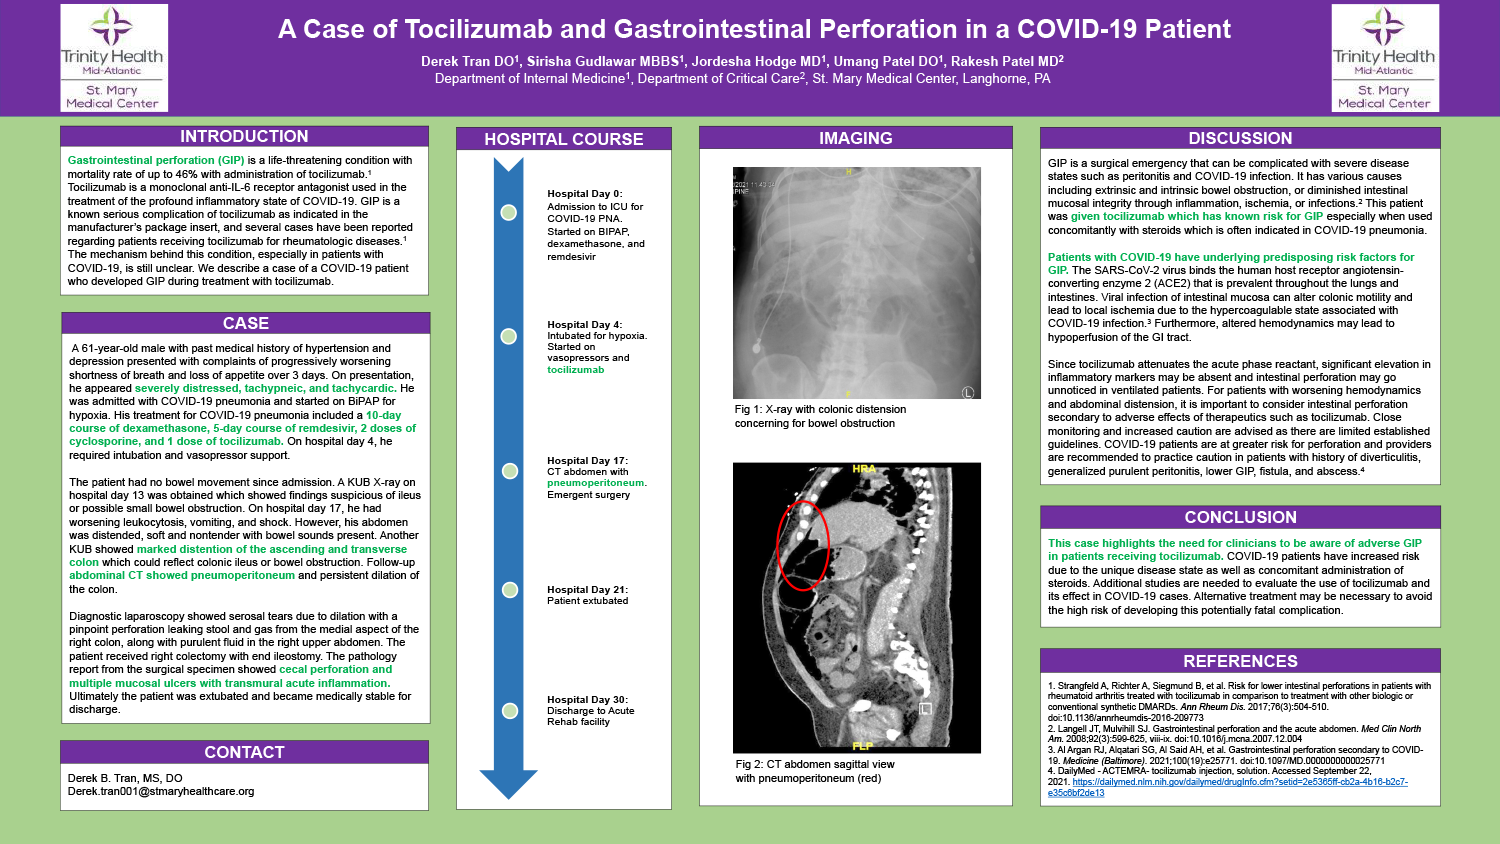 Derek Tran - PAS-4-A-Case-of-Tocilizumab-and-Intestinal-Perforation-in-a-COVID-19-Patient